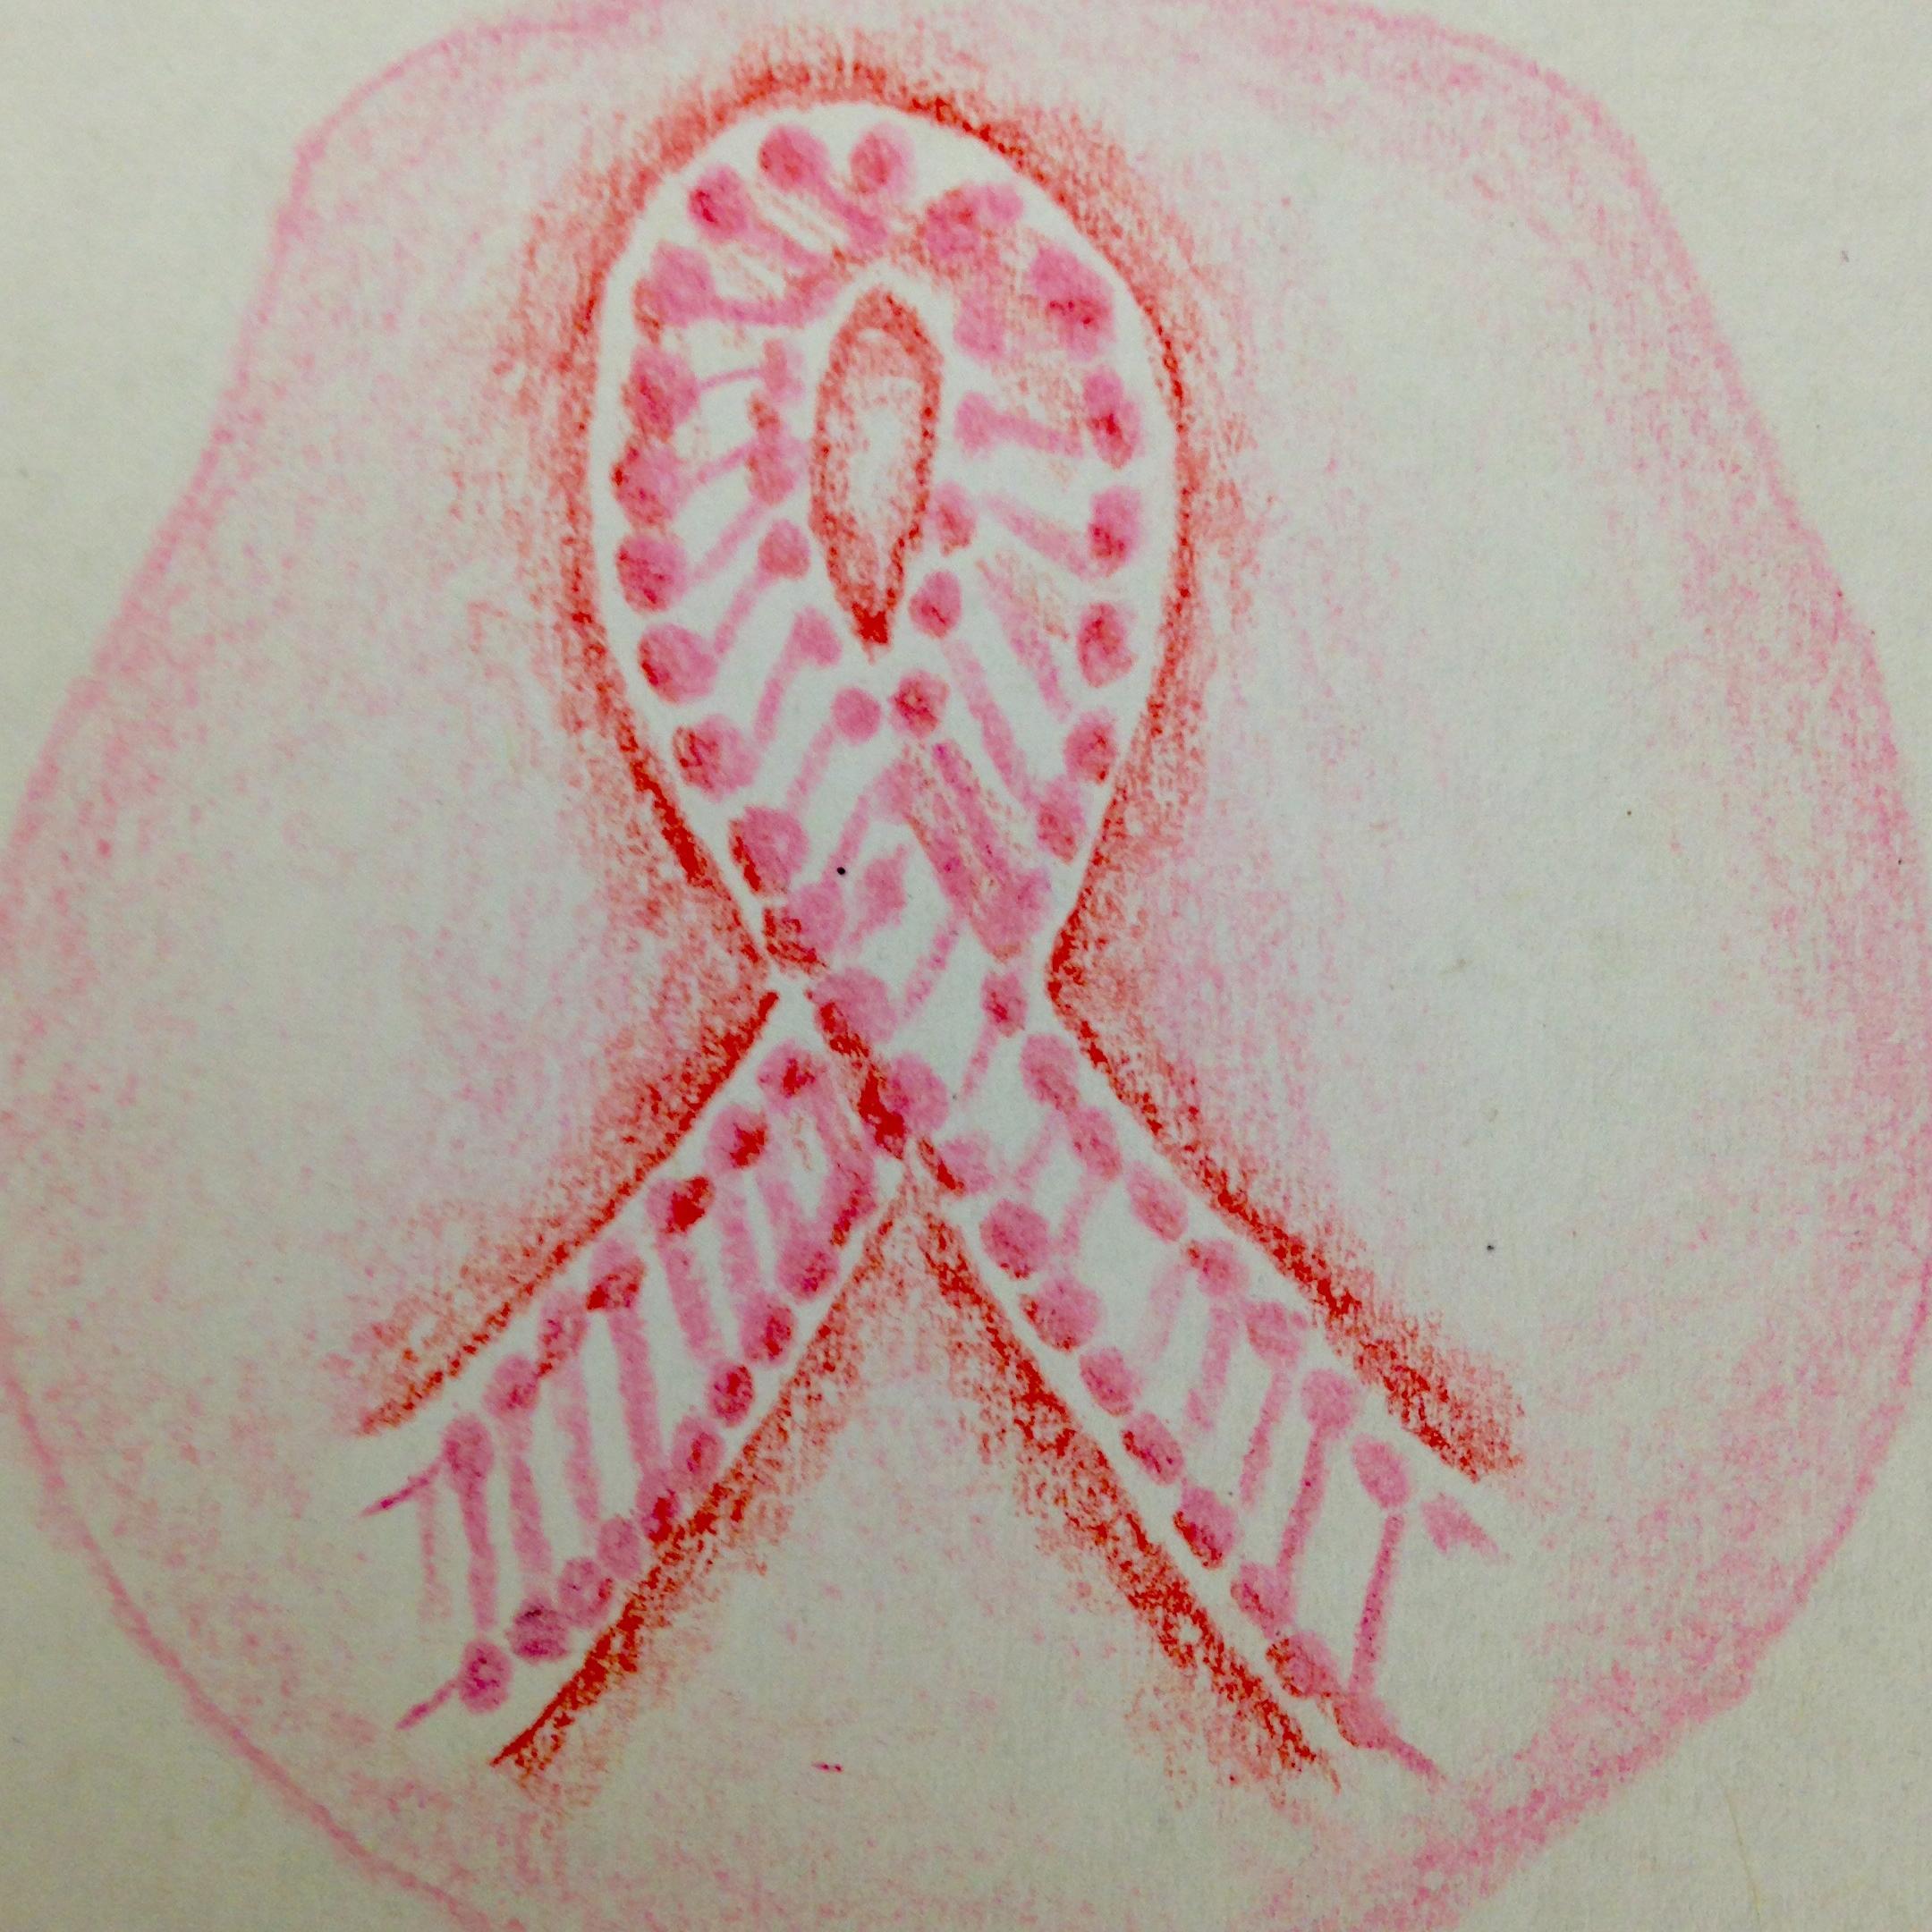 follow us on facebook - help us defeat breast cancer with genome sequencing